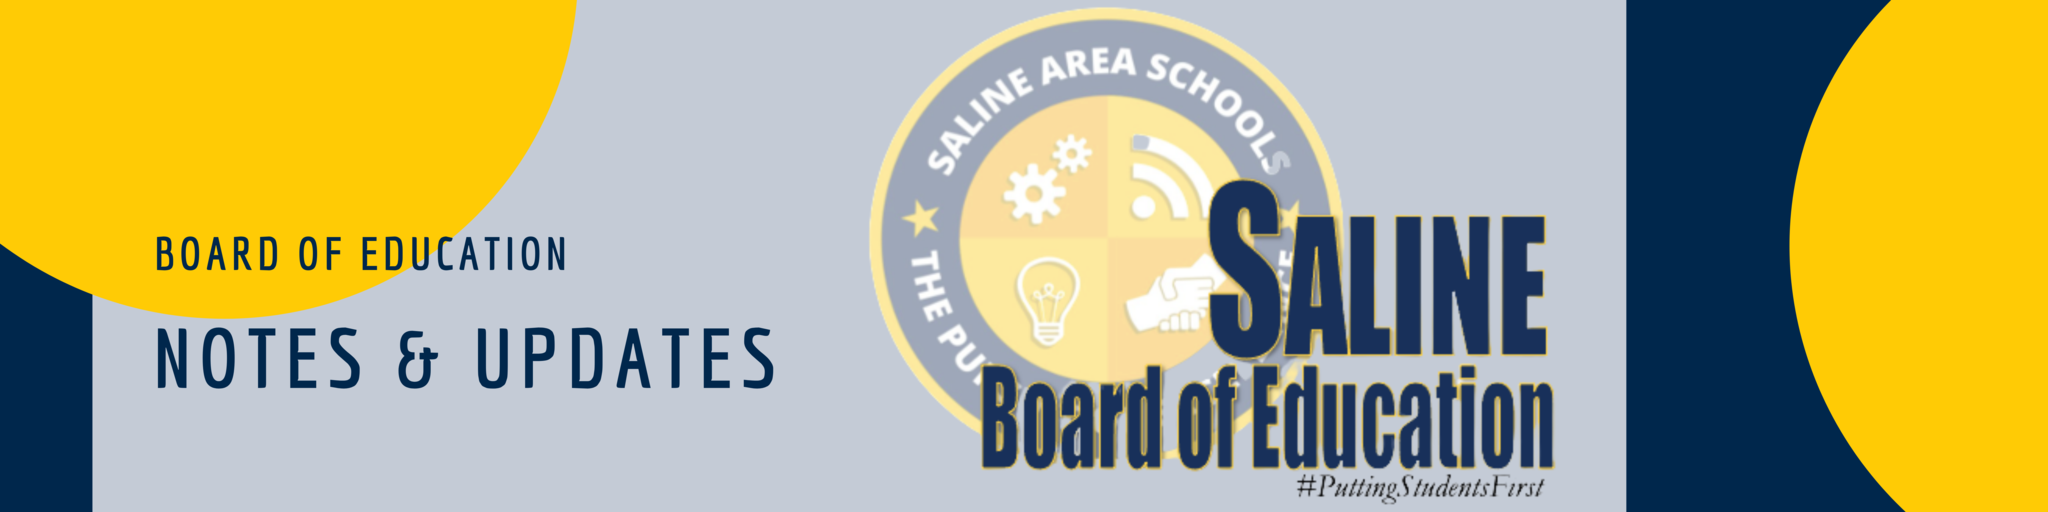 Board of Education - Notes & Updates